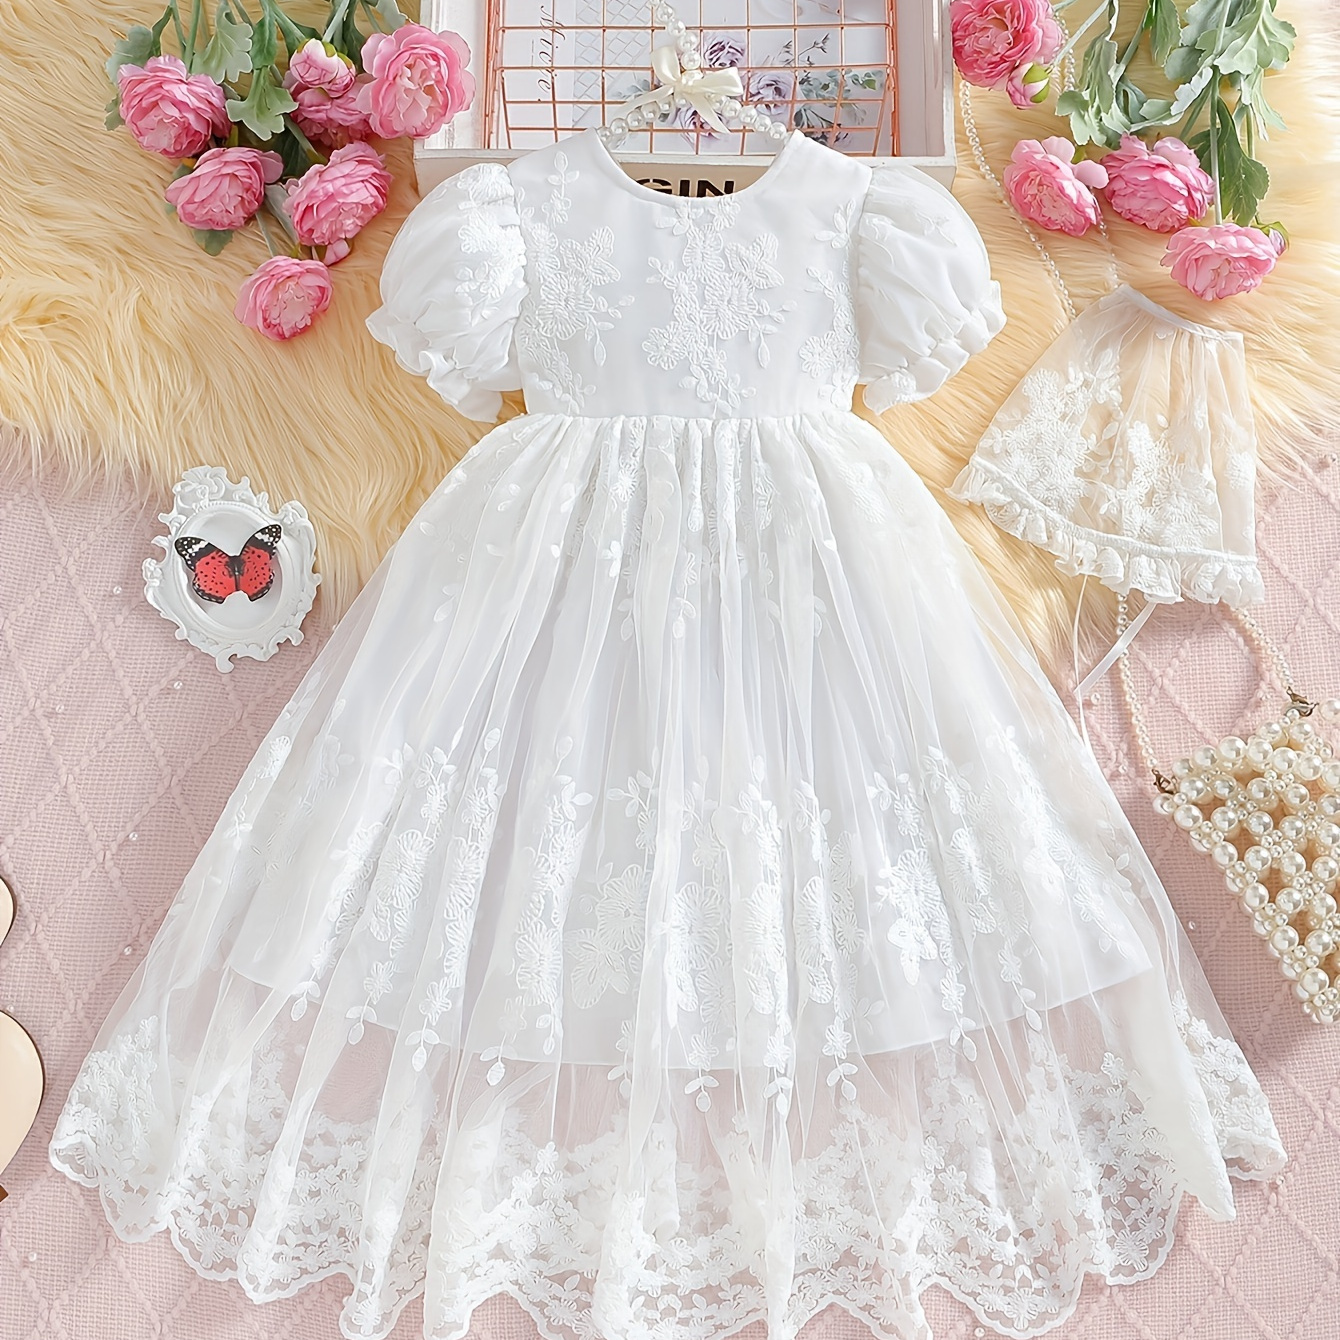 

Infant Formal Dress Holiday Gown Birthday Christening Gown (comes With Lace Hat)